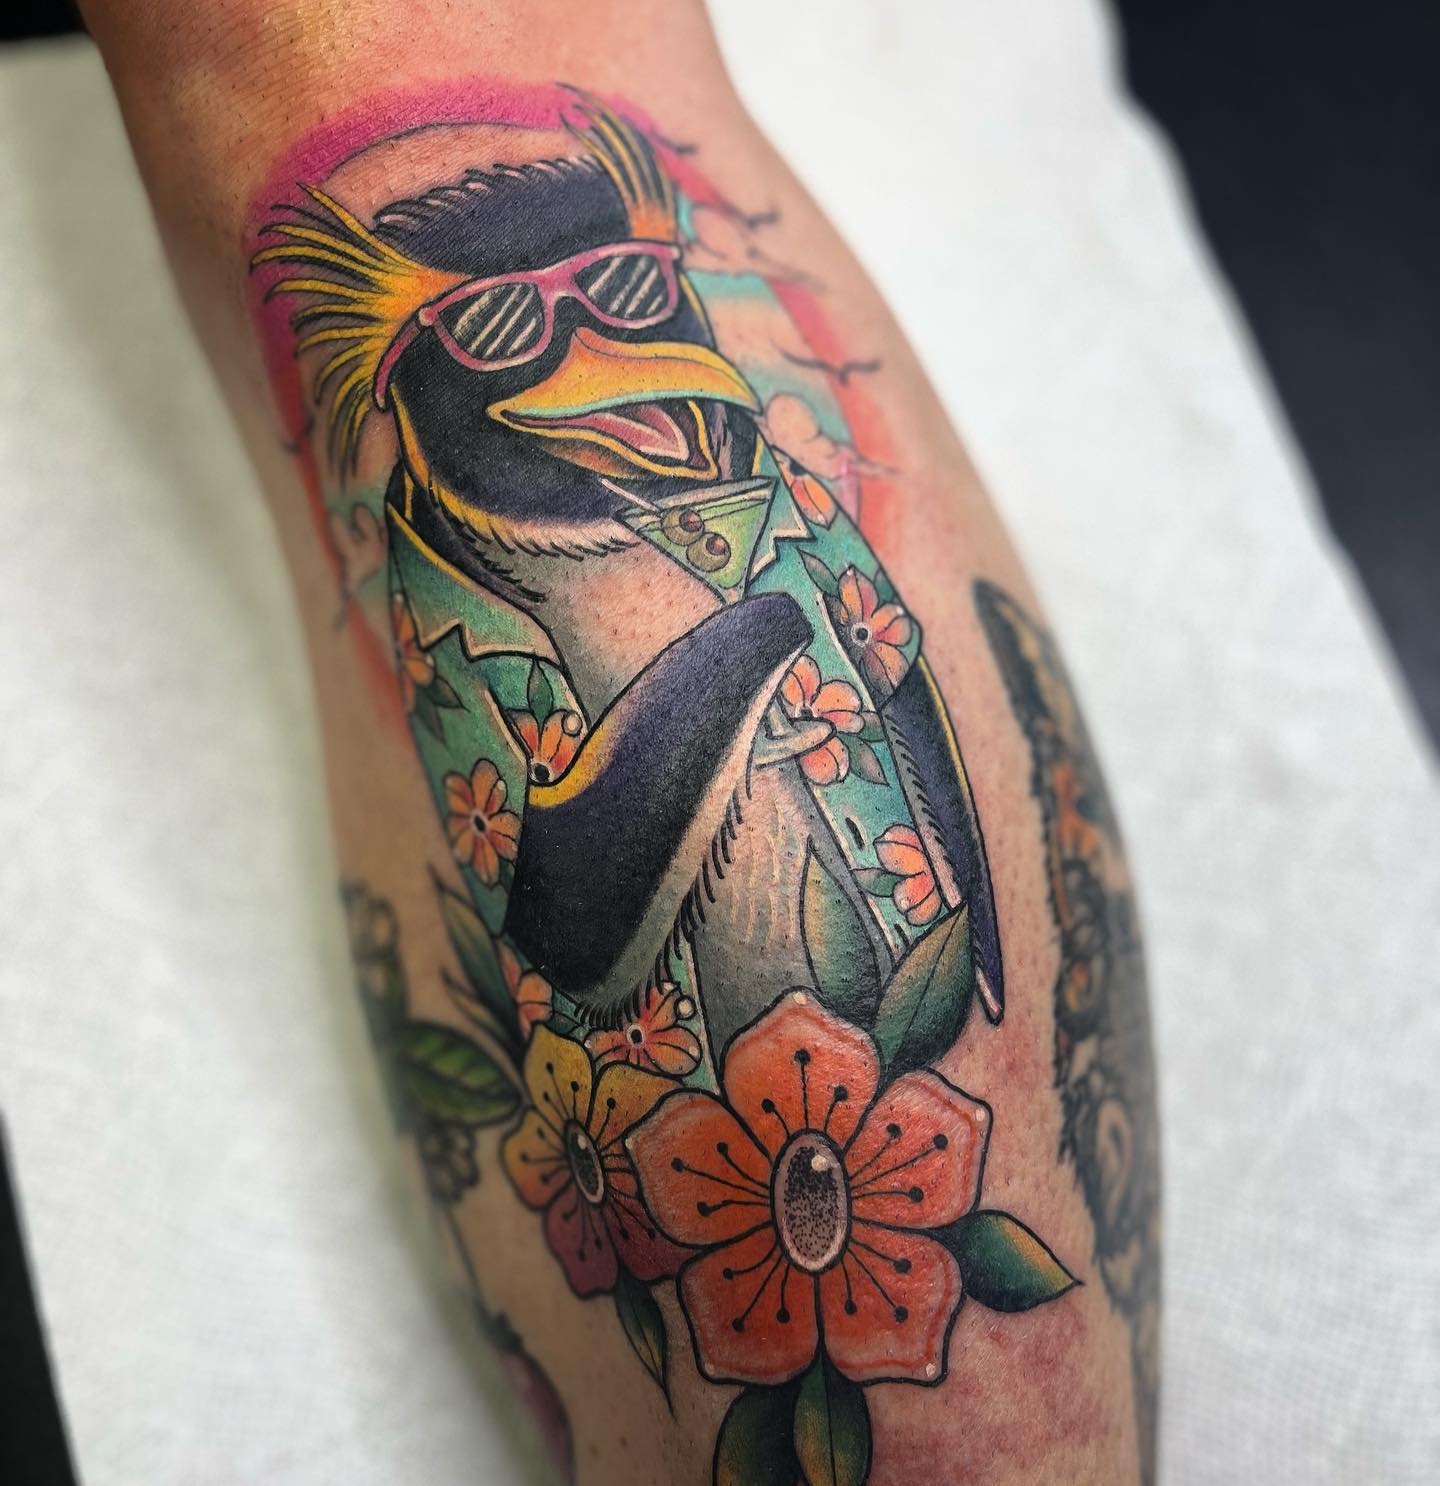 The Hawaiian vibe is all about flowers, colors and music. To reflect your love of Hawaii in your penguin tattoo, there is no better choice than the one above.